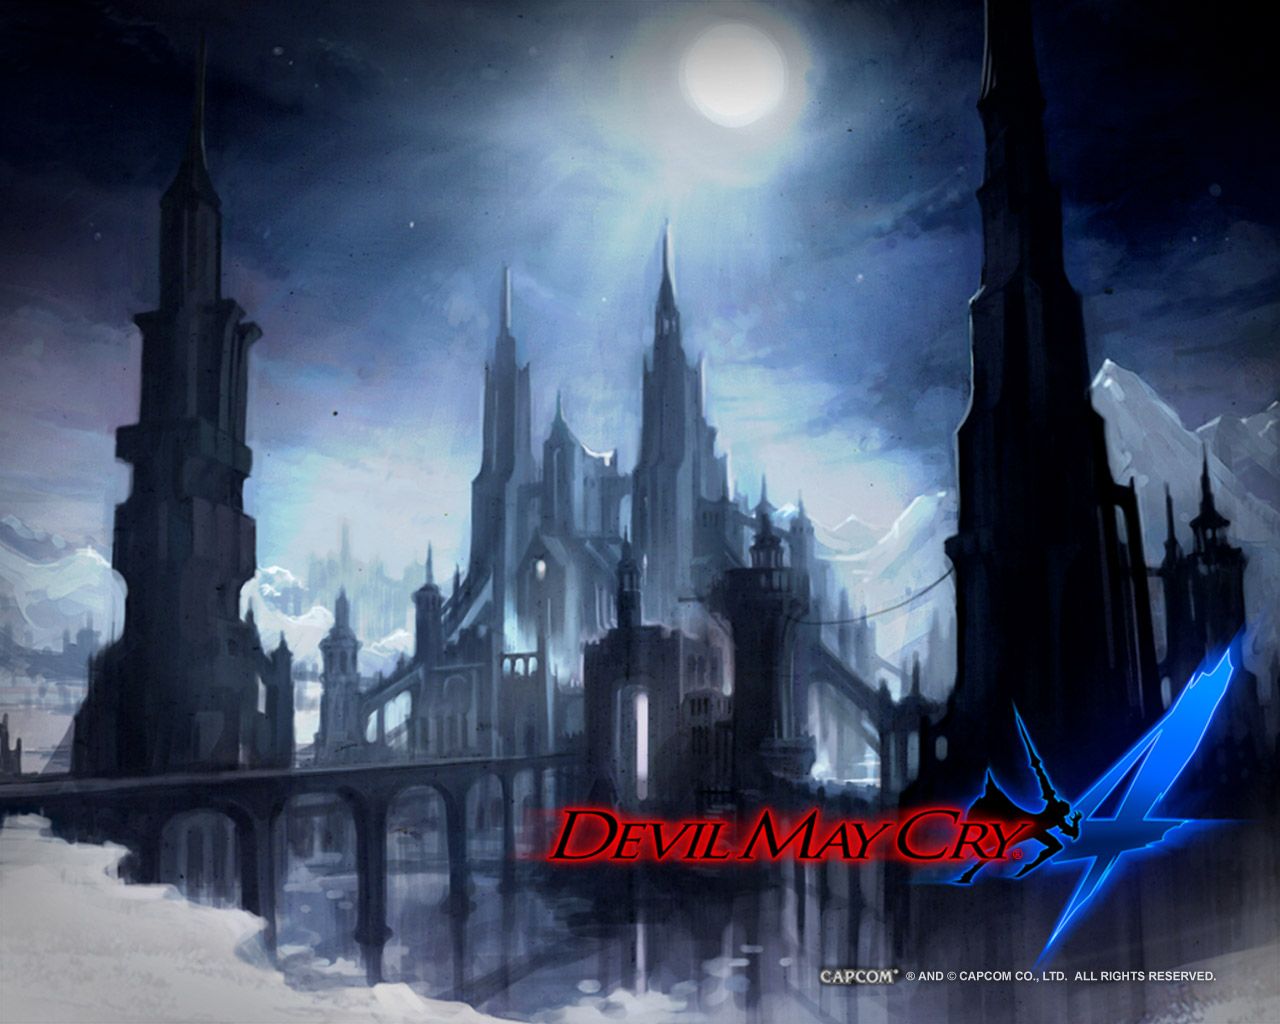 xbox360 game - Devil may cry 4 wallpapers 1280x1024 NO.6 Desktop ...